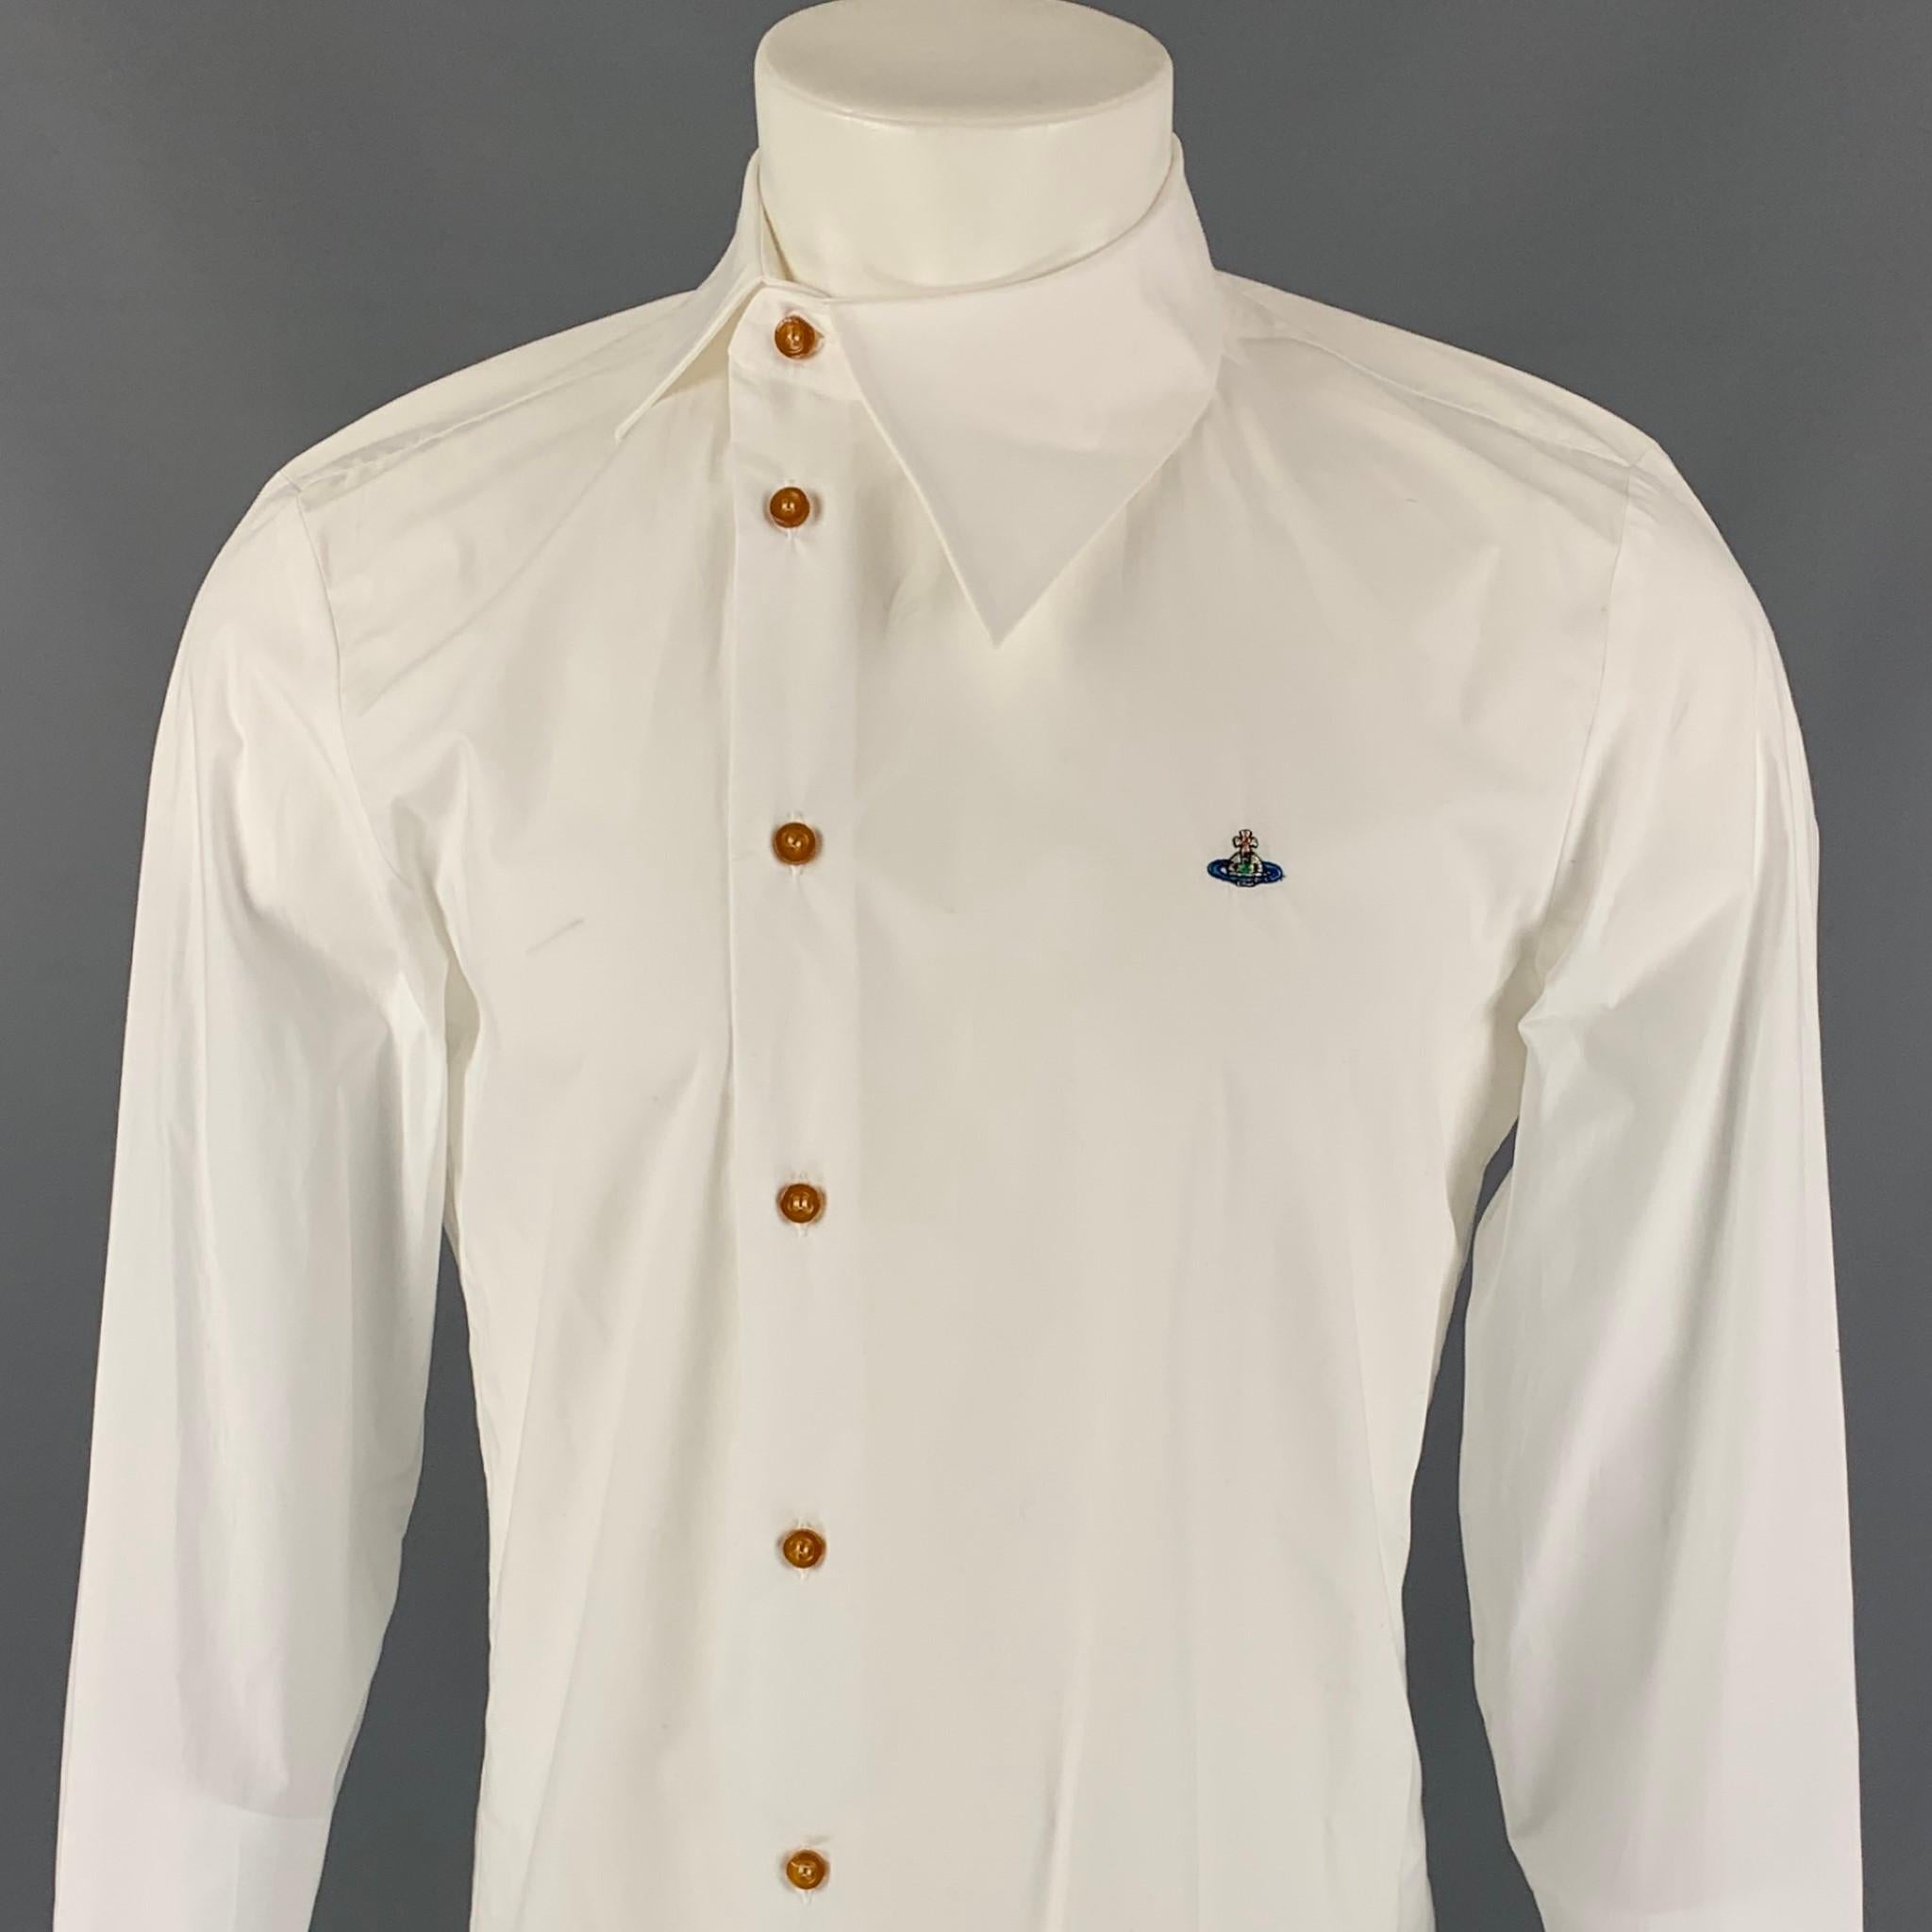 VIVIENNE WESTWOOD MAN long sleeve shirt comes in a white cotton featuring a embroidered logo, asymmetrical collar design, and a buttoned closure. Made in Italy.

Very Good Pre-Owned Condition. Light mark at back.
Marked: II

Measurements:

Shoulder: